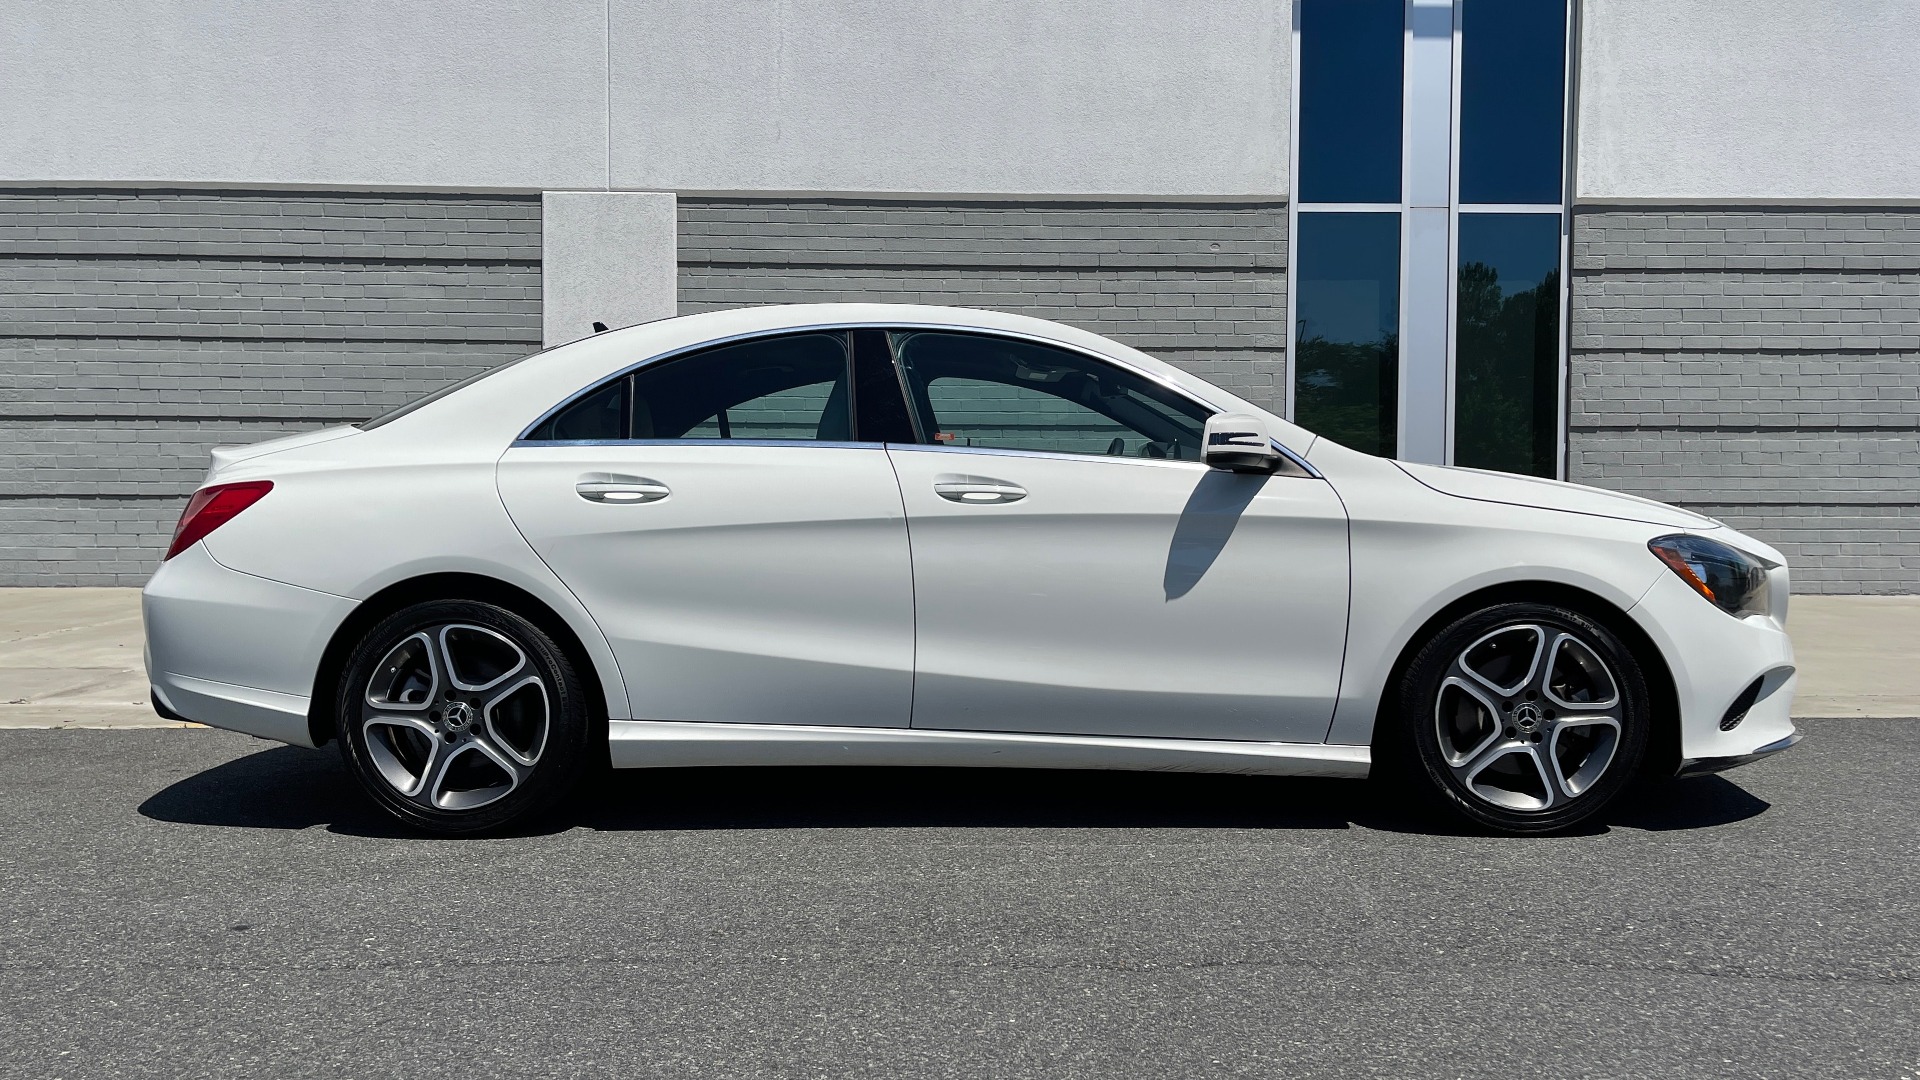 Used 2018 Mercedes-Benz CLA 250 PREMIUM / CONV PKG / APPLE / PANO-ROOF / REARVIEW for sale Sold at Formula Imports in Charlotte NC 28227 4